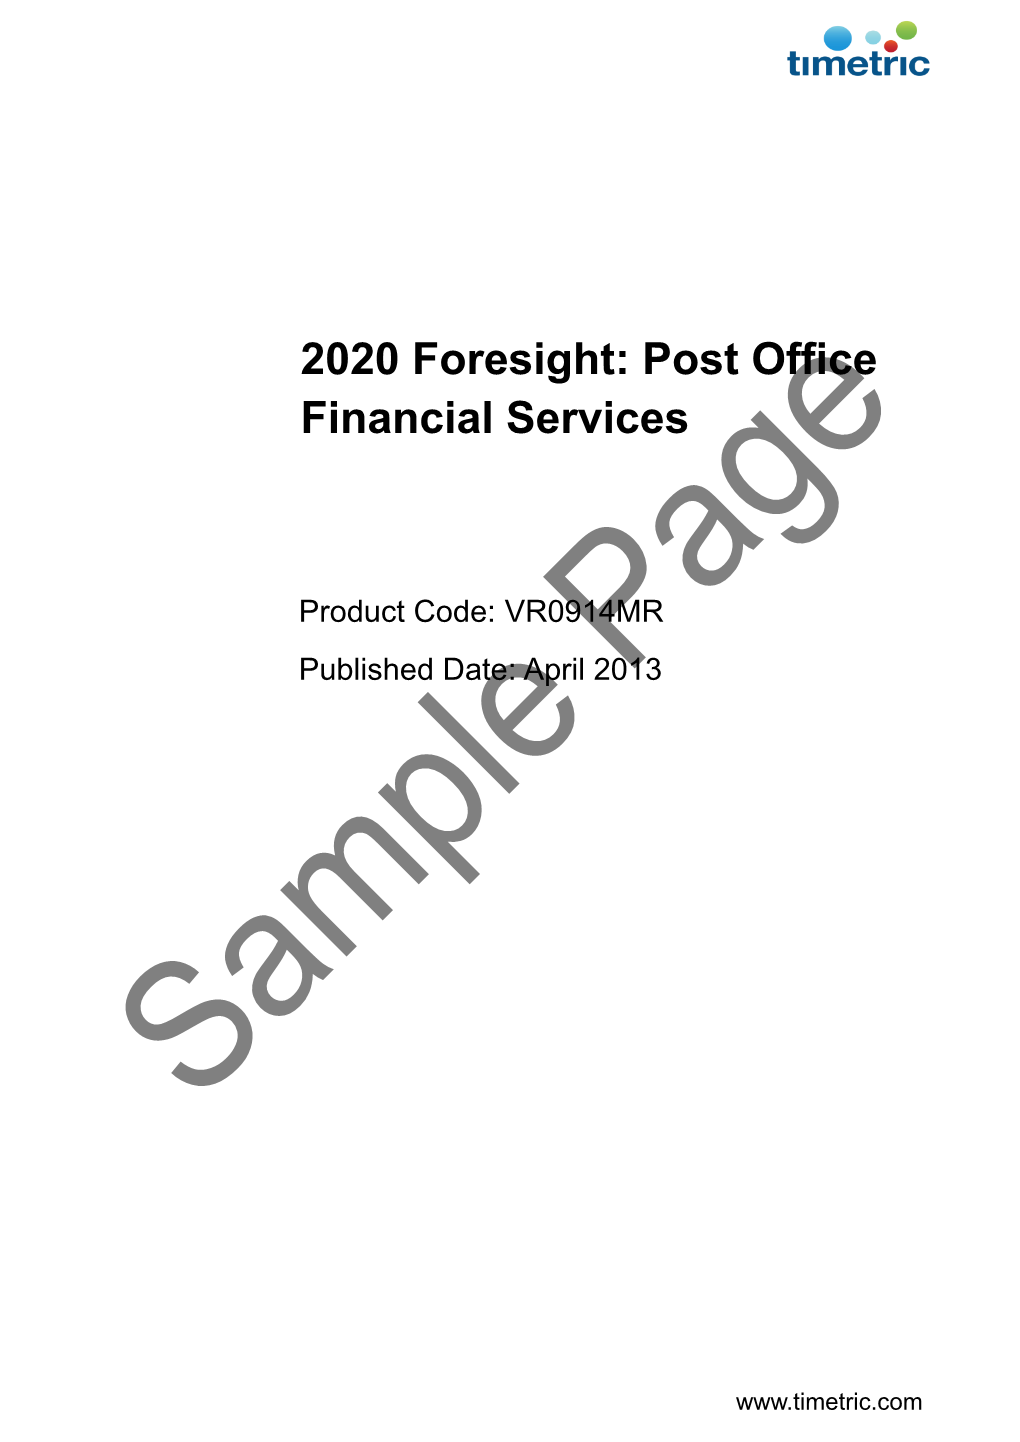 2020 Foresight: Post Office Financial Services